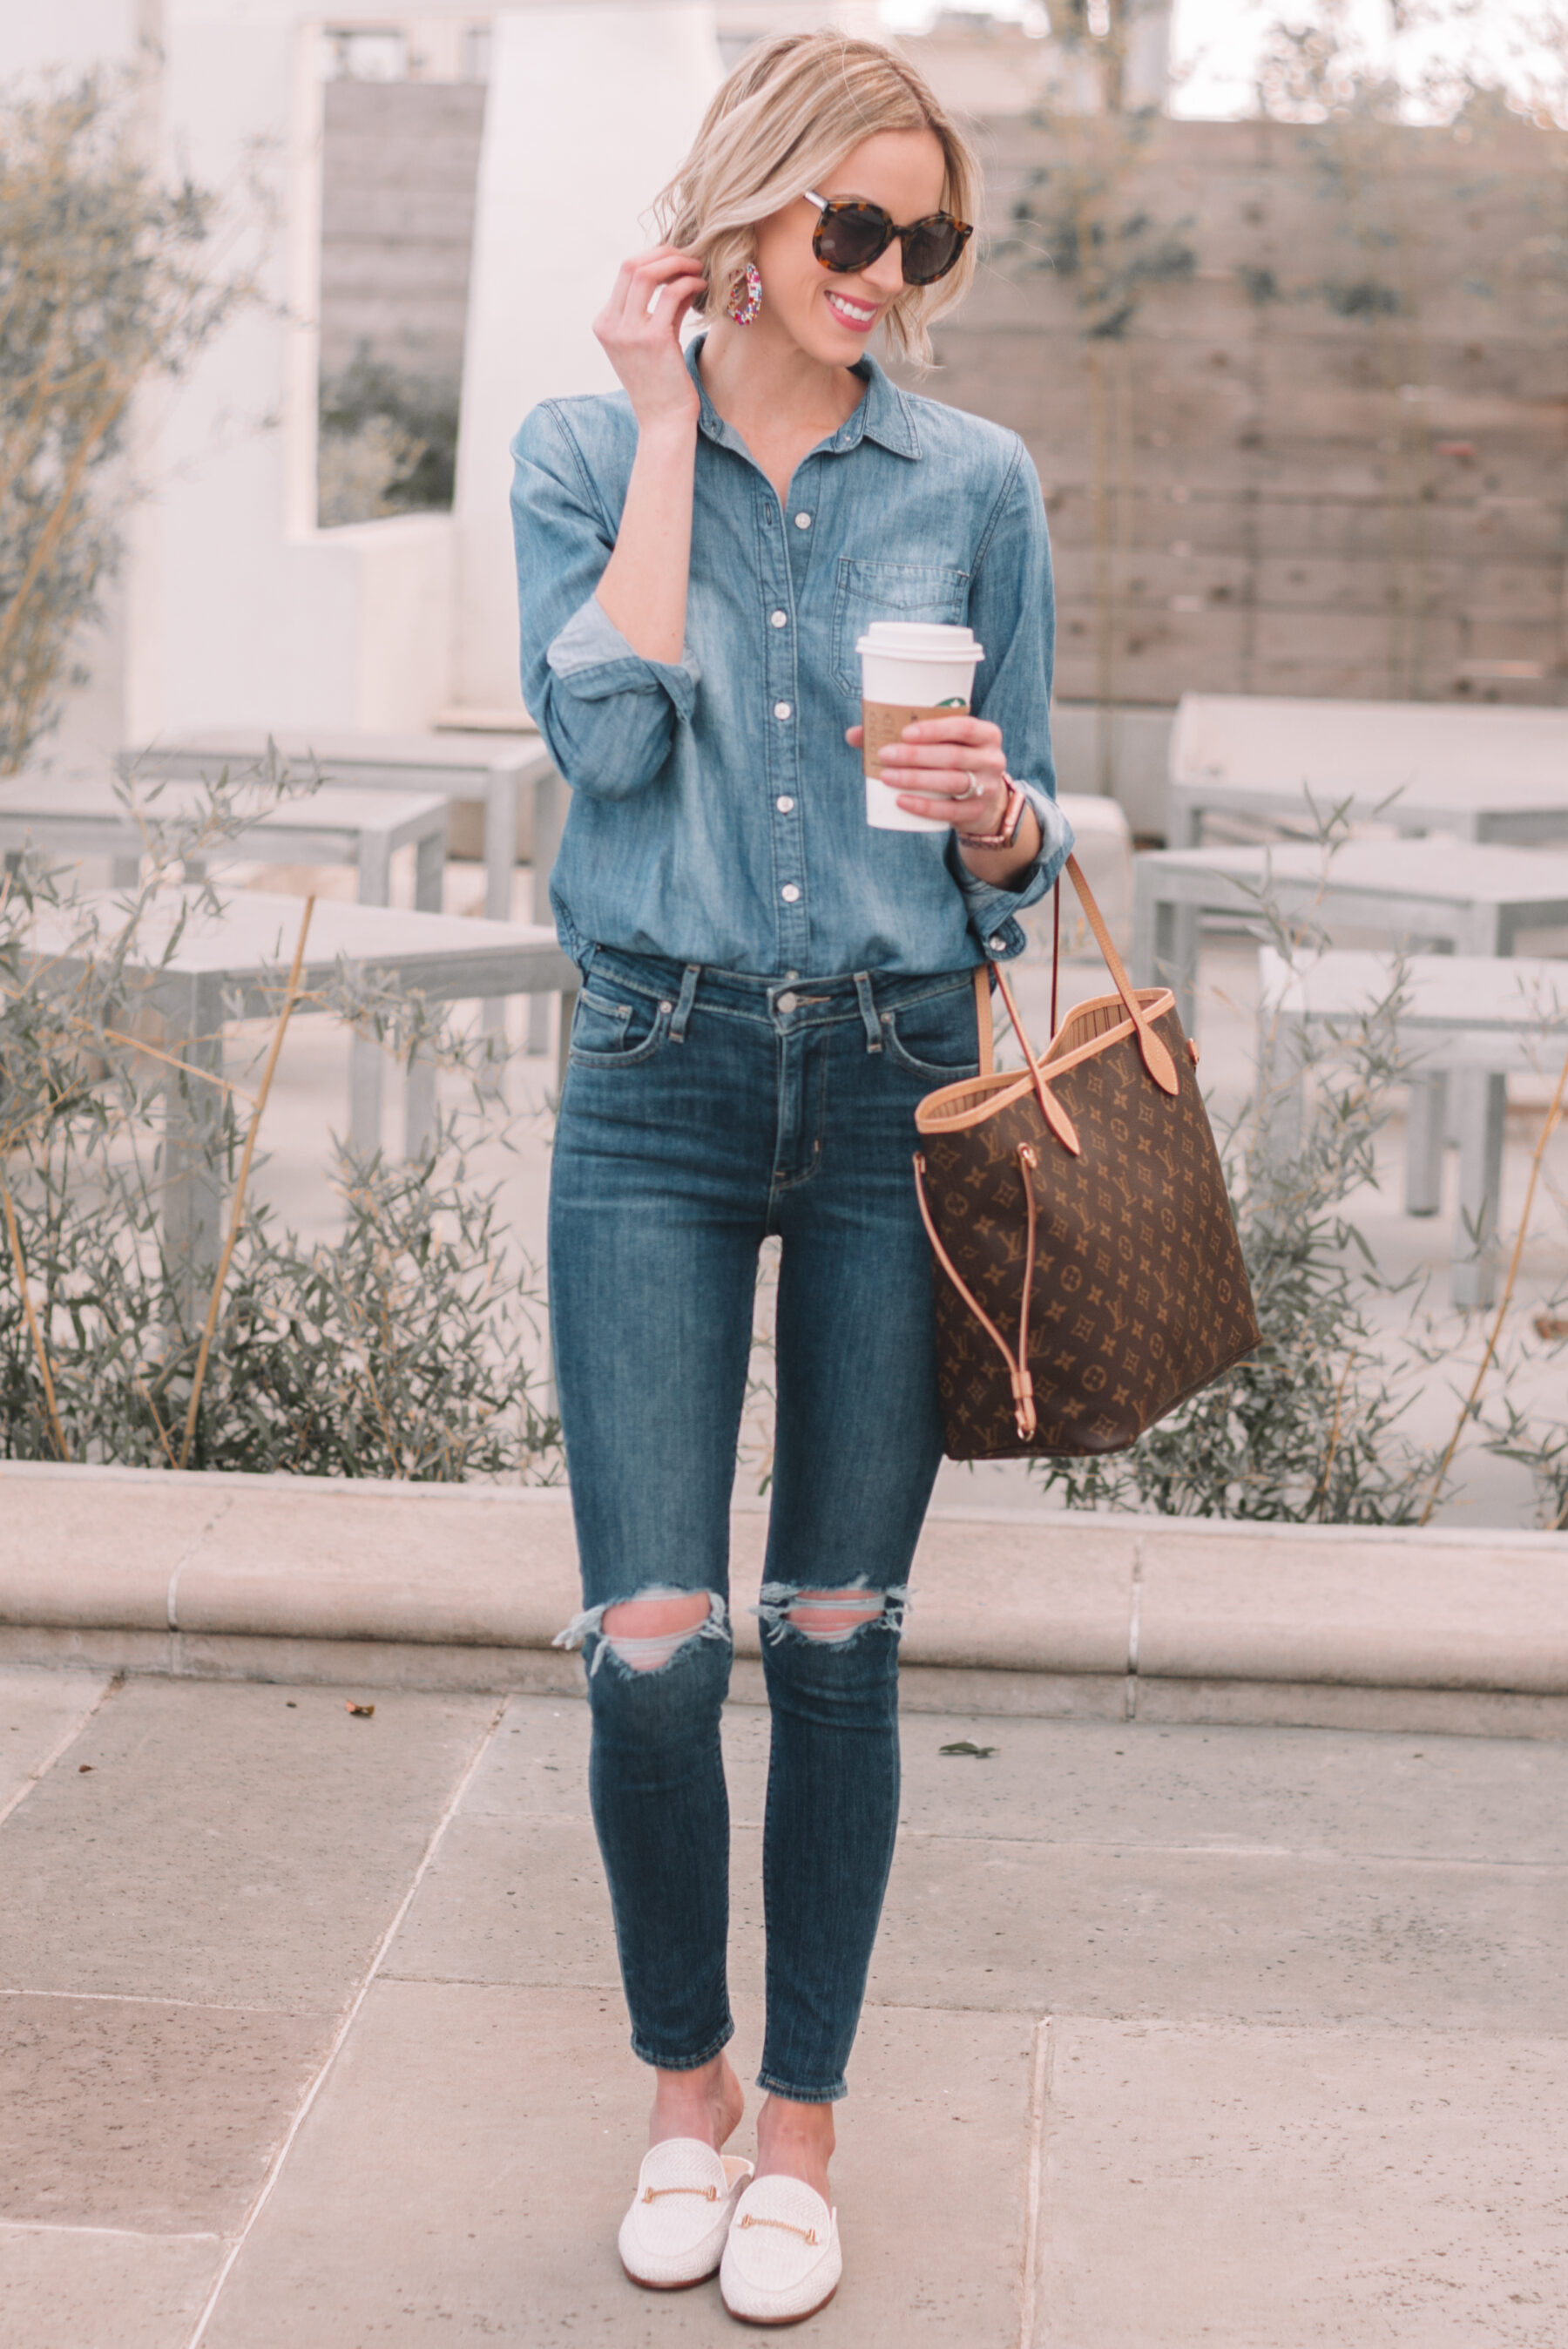 How to Wear a Chambray Shirt - 9 Chambray Shirt Outfits - Straight A Style